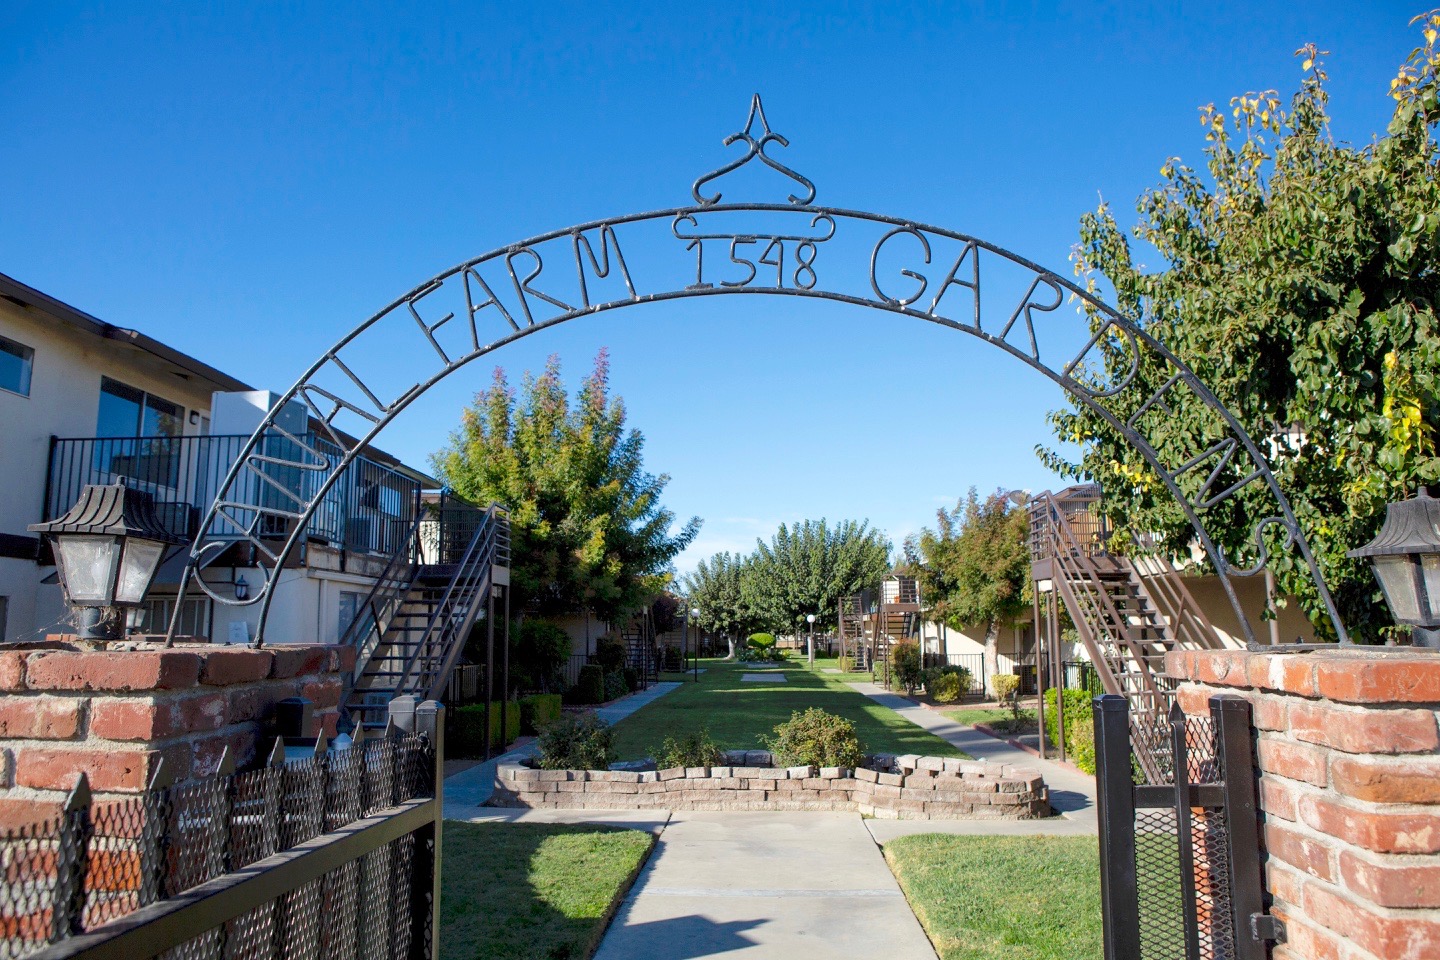 Canal Farm Gardens is a 50-plus unit apartment complex in Los Banos under renovation. A renter who now pays $850 a month for a two-bedroom will see the rent rise to more than $1,200 — or face eviction. (Photo by Anne Wernikoff for CalMatters)